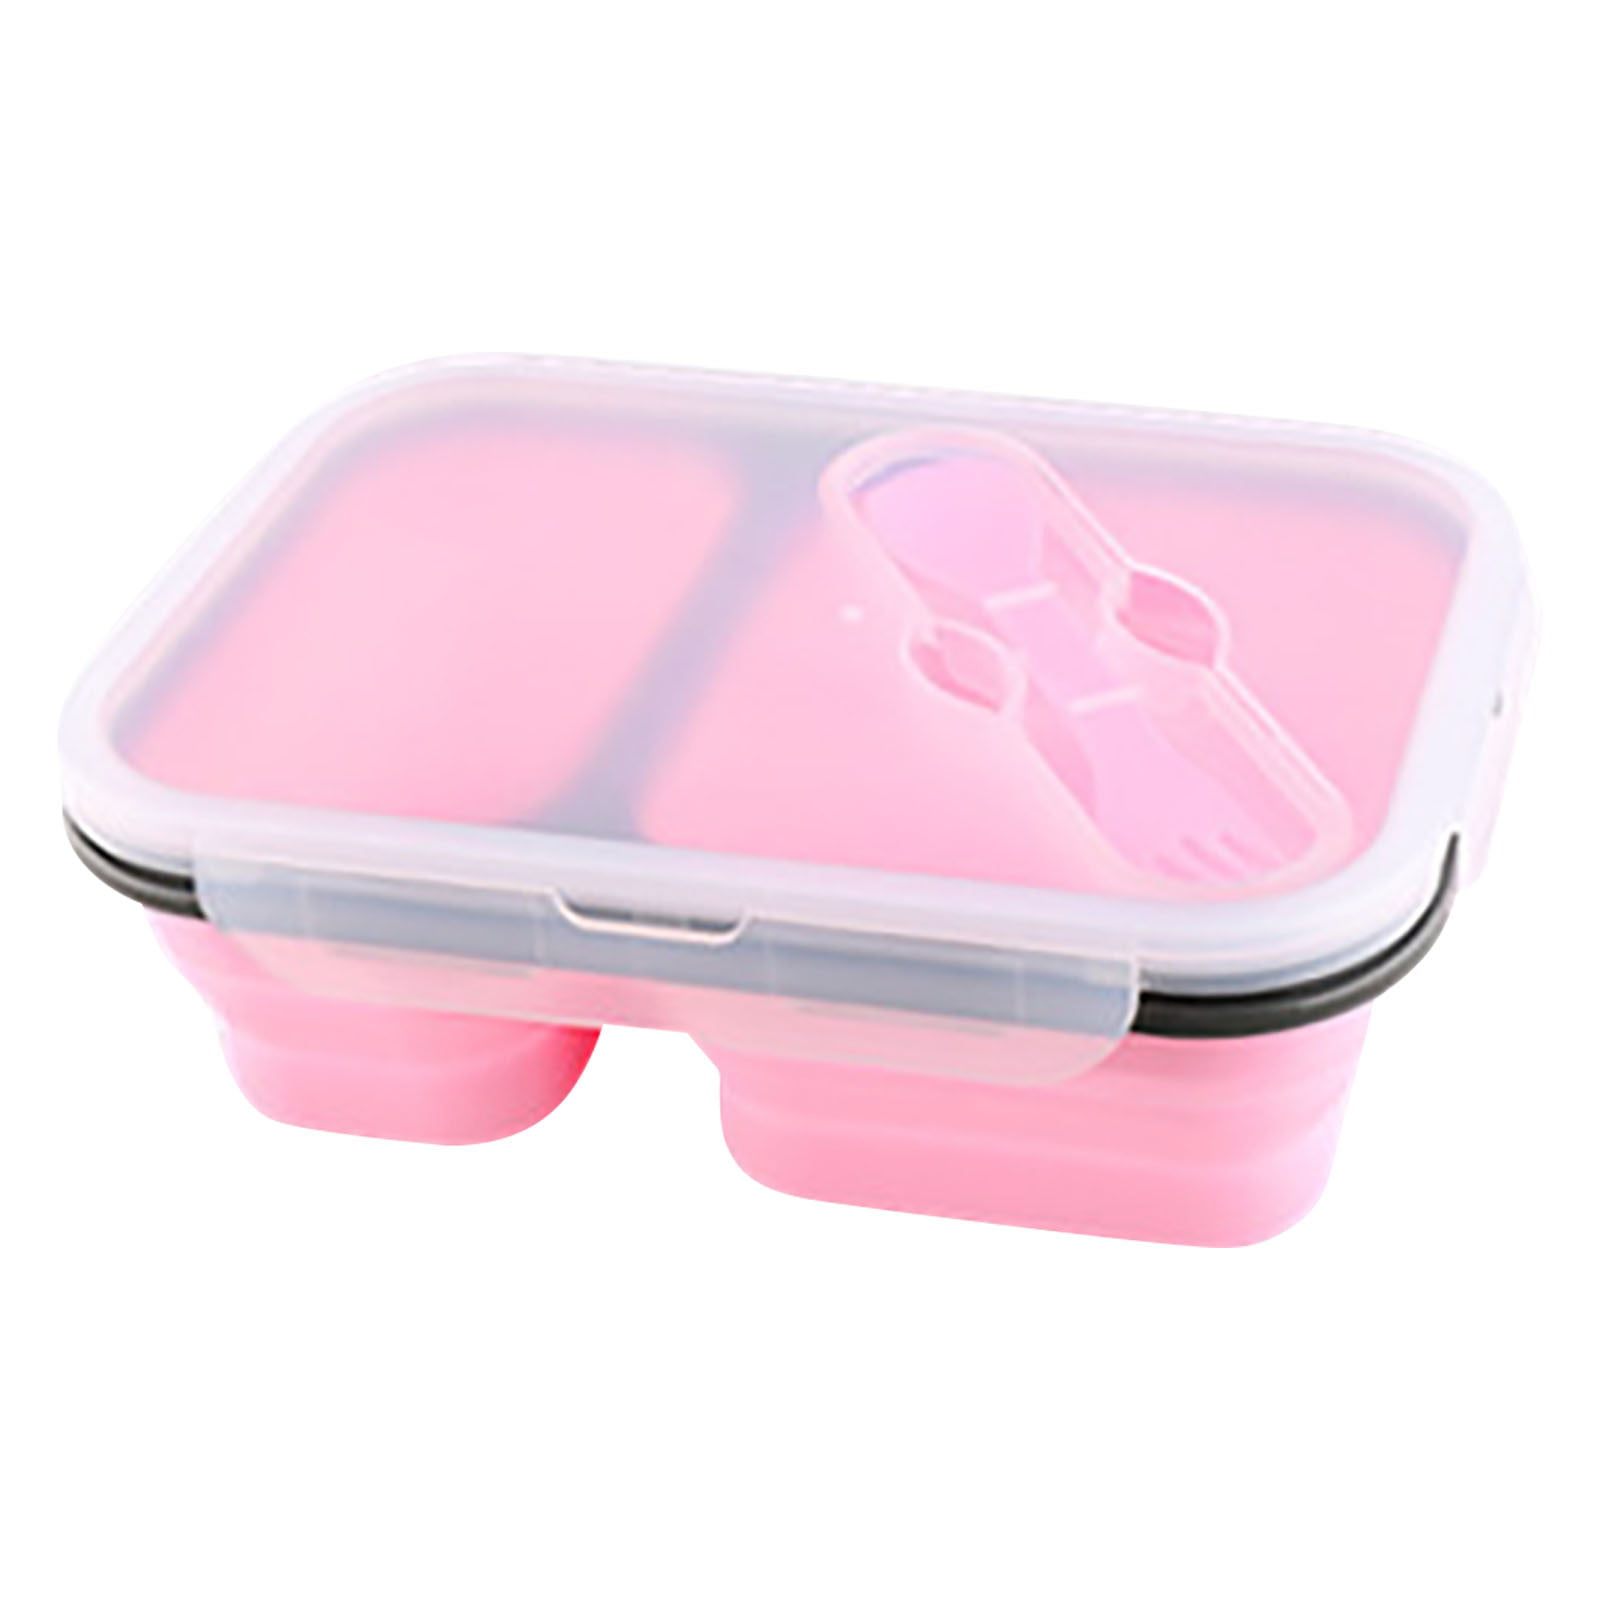 Brighten Your Workday with The HÄMTMAT Tender Sunbeam Bento Lunch Box